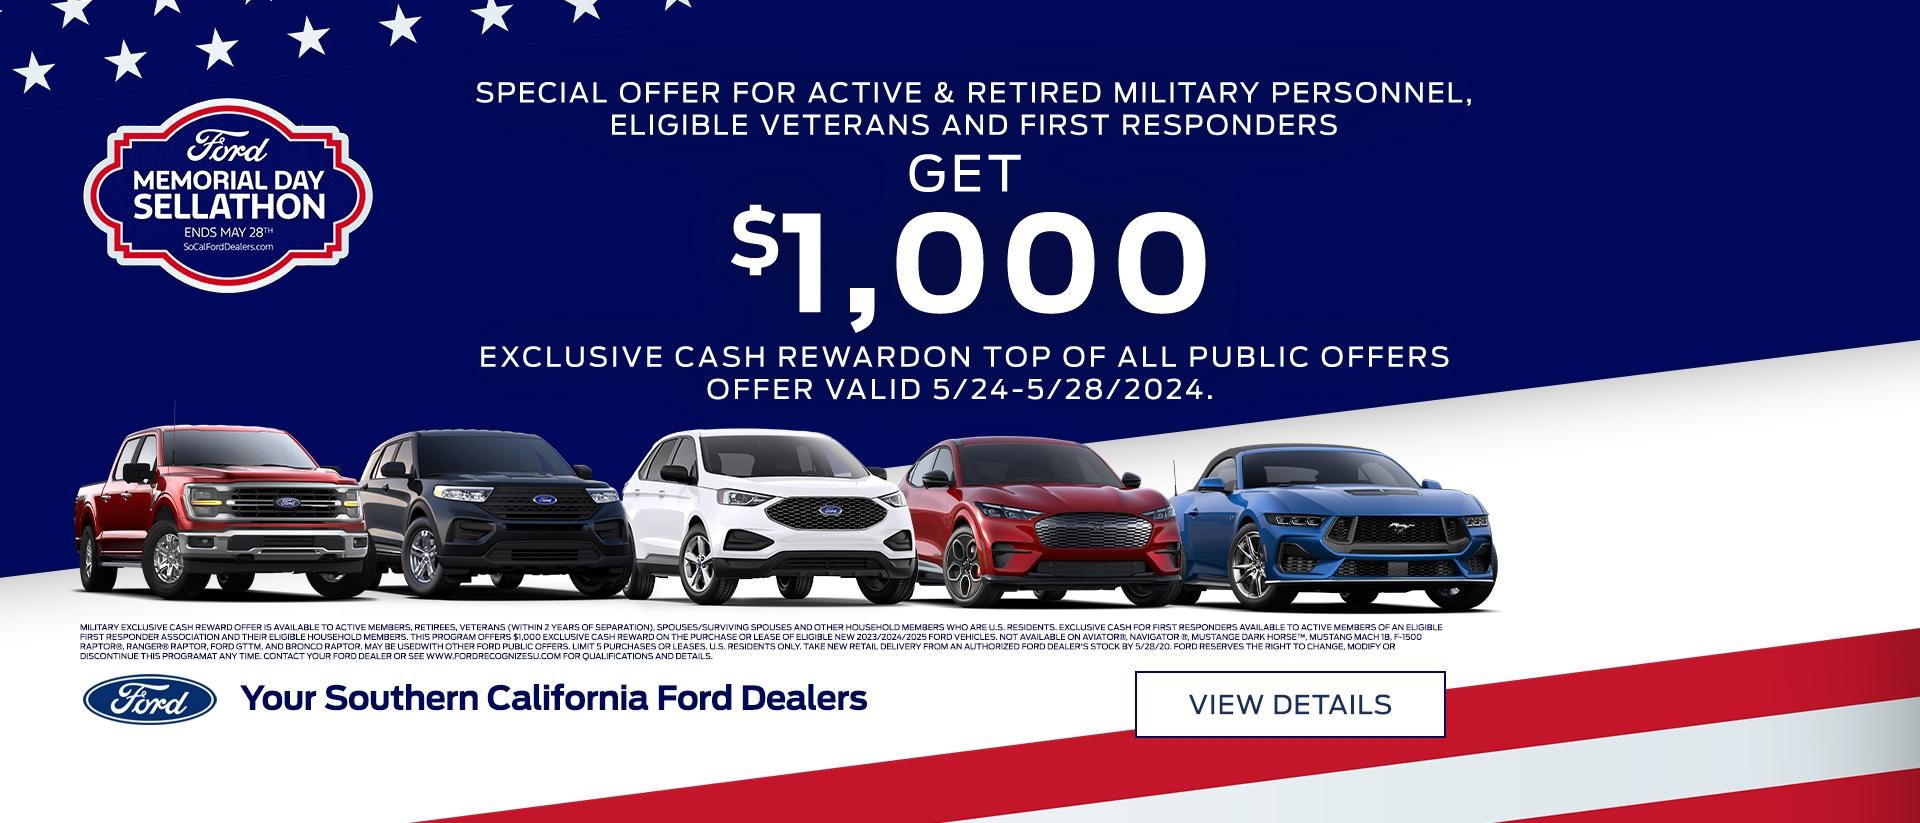 Special Offer for Military Personnel, Veterans &amp; First Responders | Memorial Day Sellathon | Southern California Ford Dealers